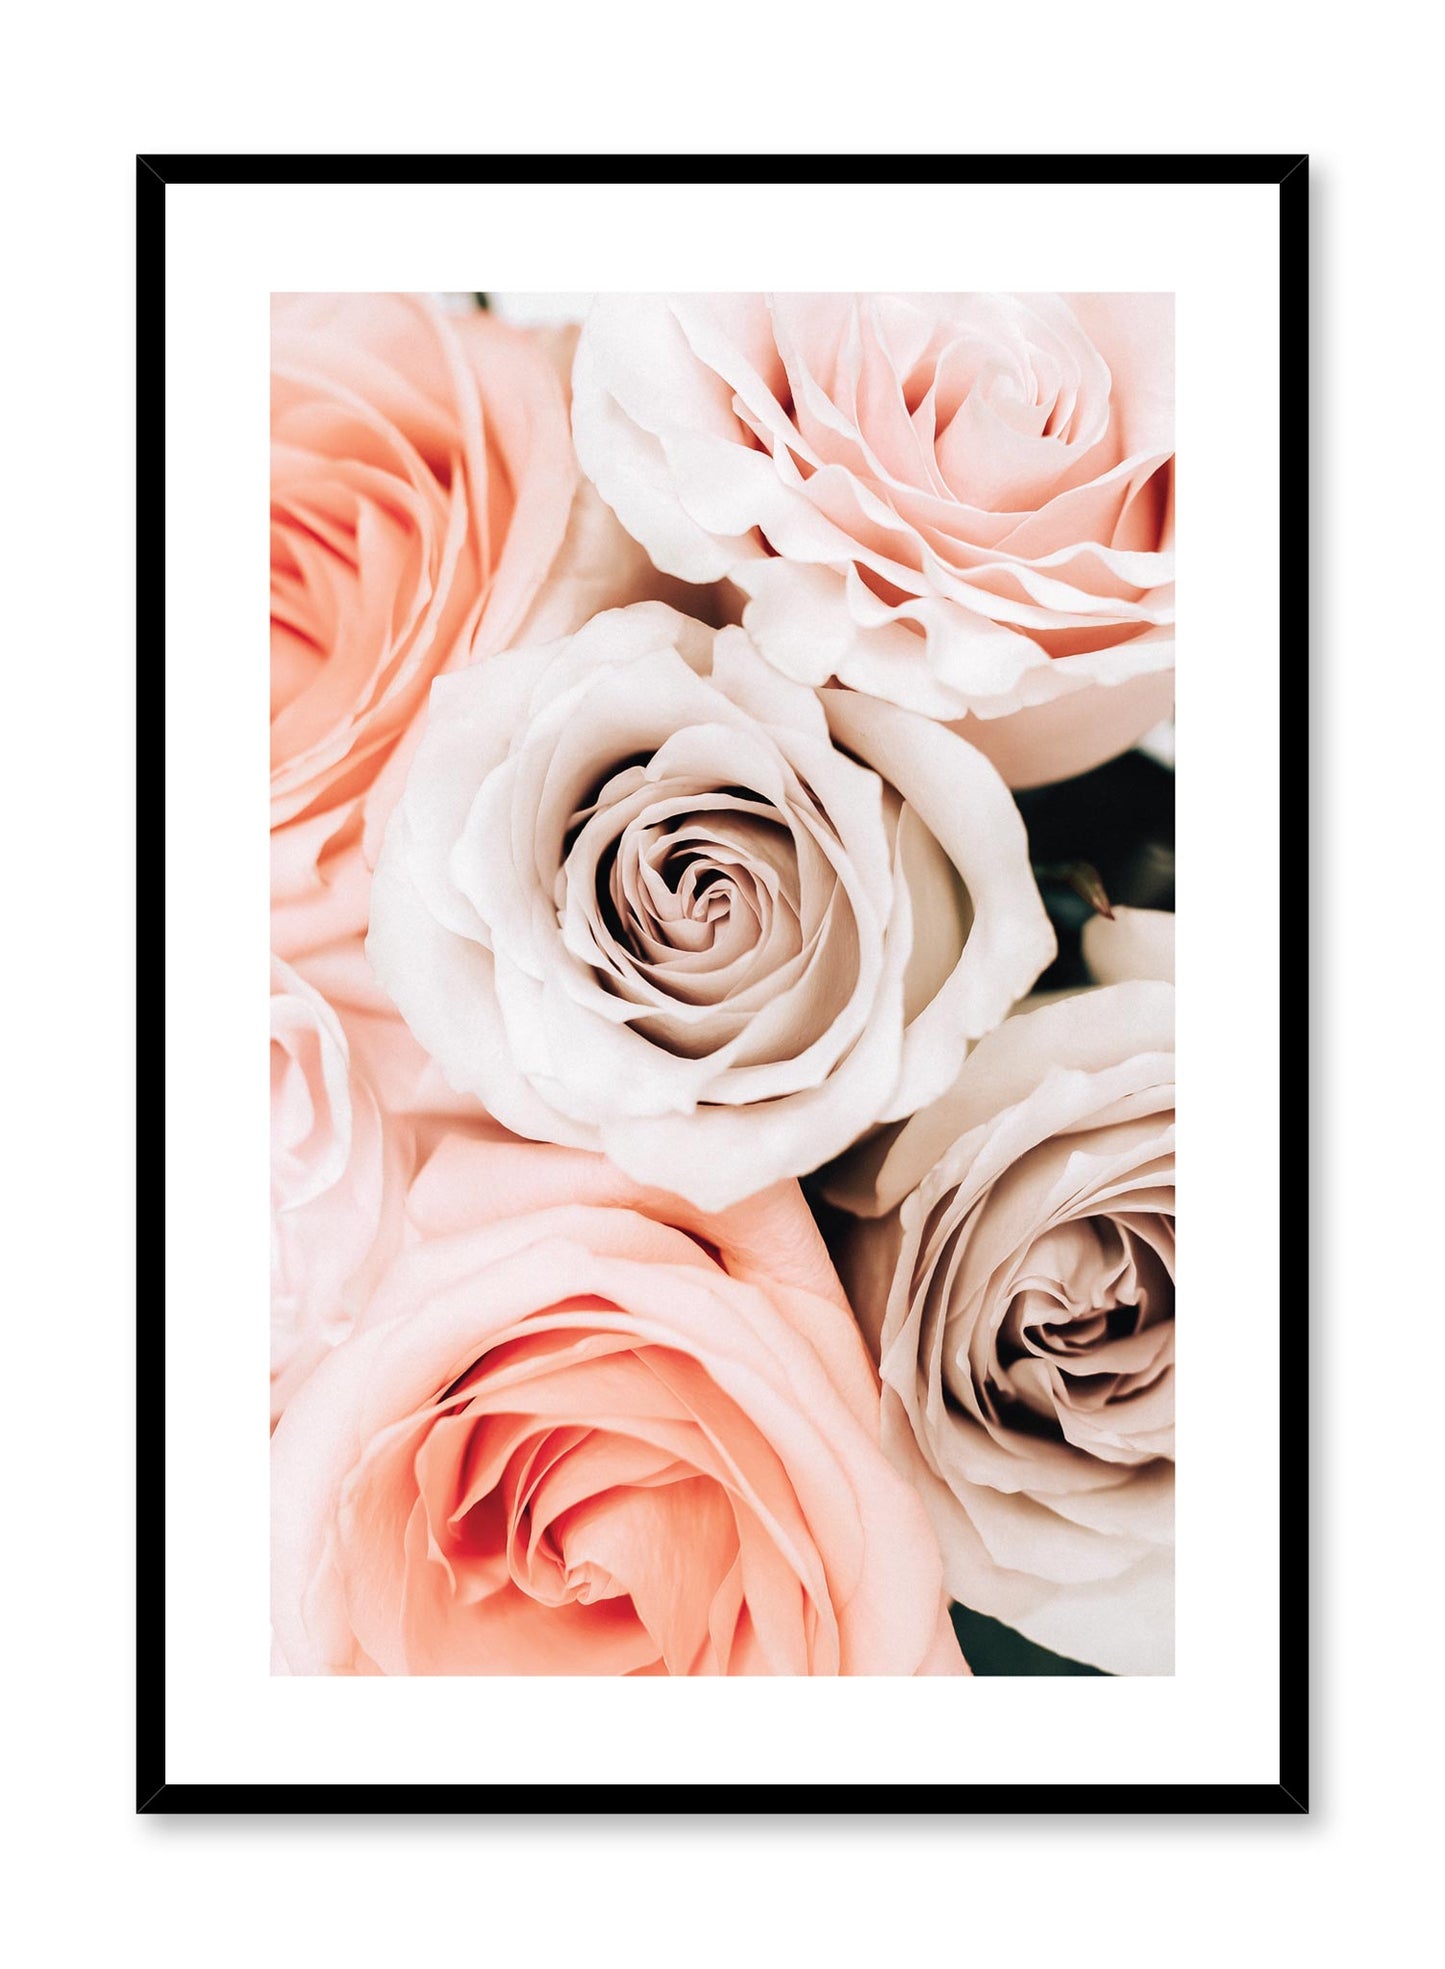 Minimalistic wall poster by Opposite Wall with bouquet of roses floral photography